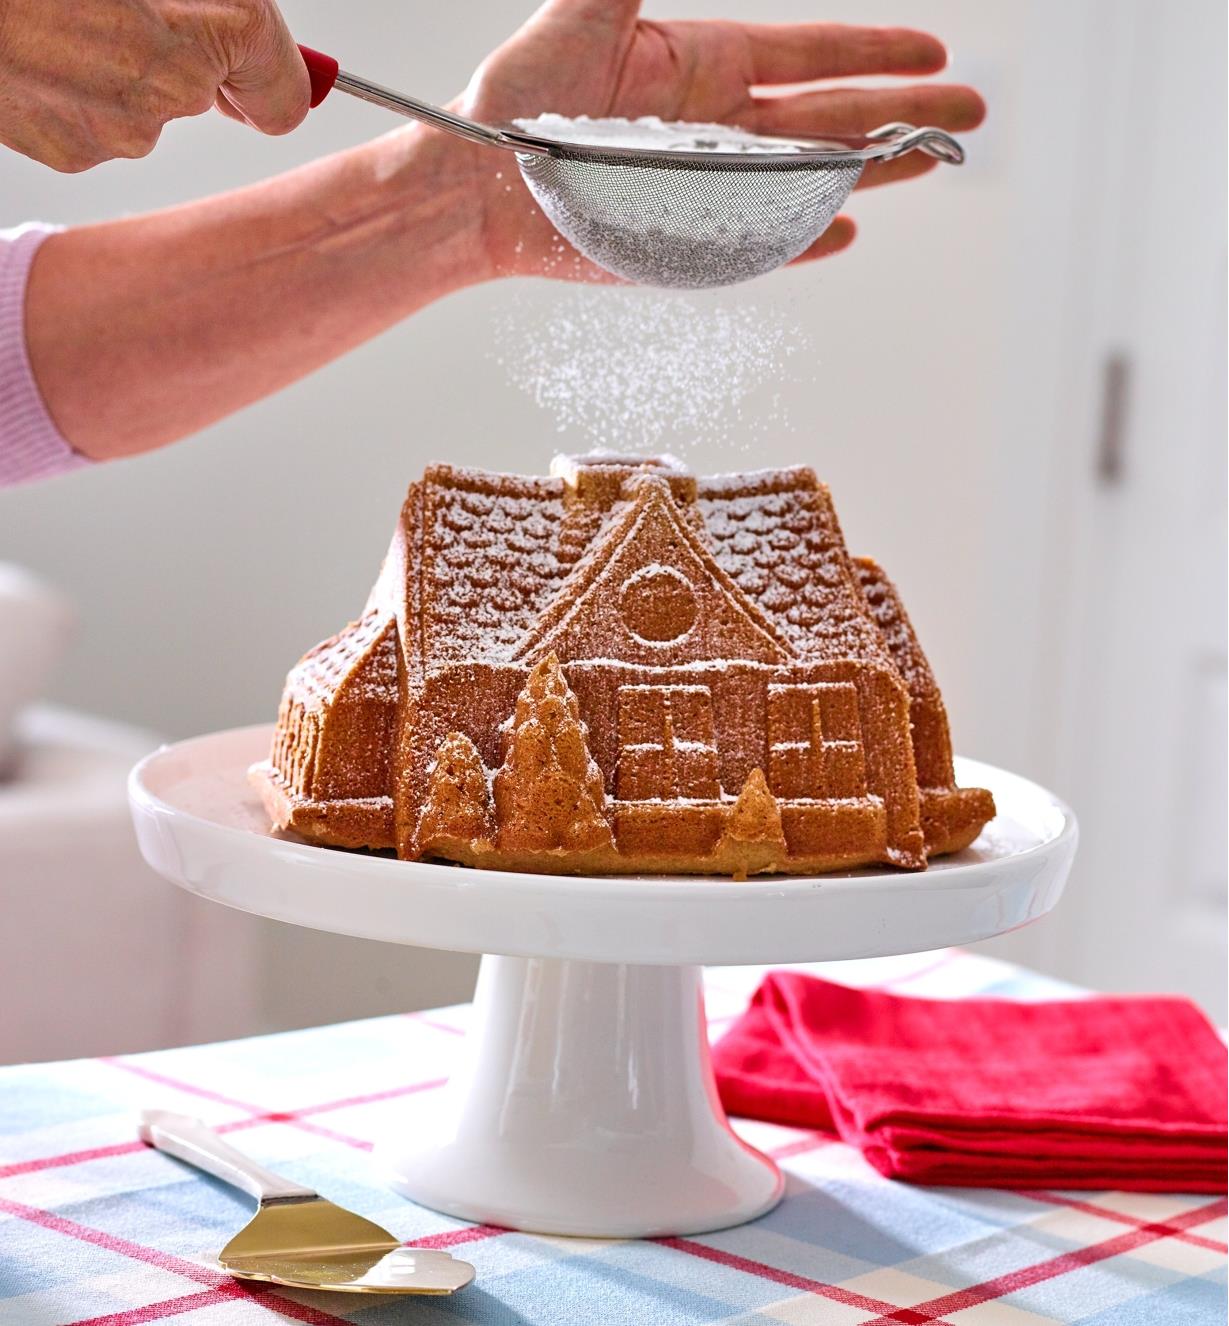 Dusting powdered sugar onto a gingerbread house cake